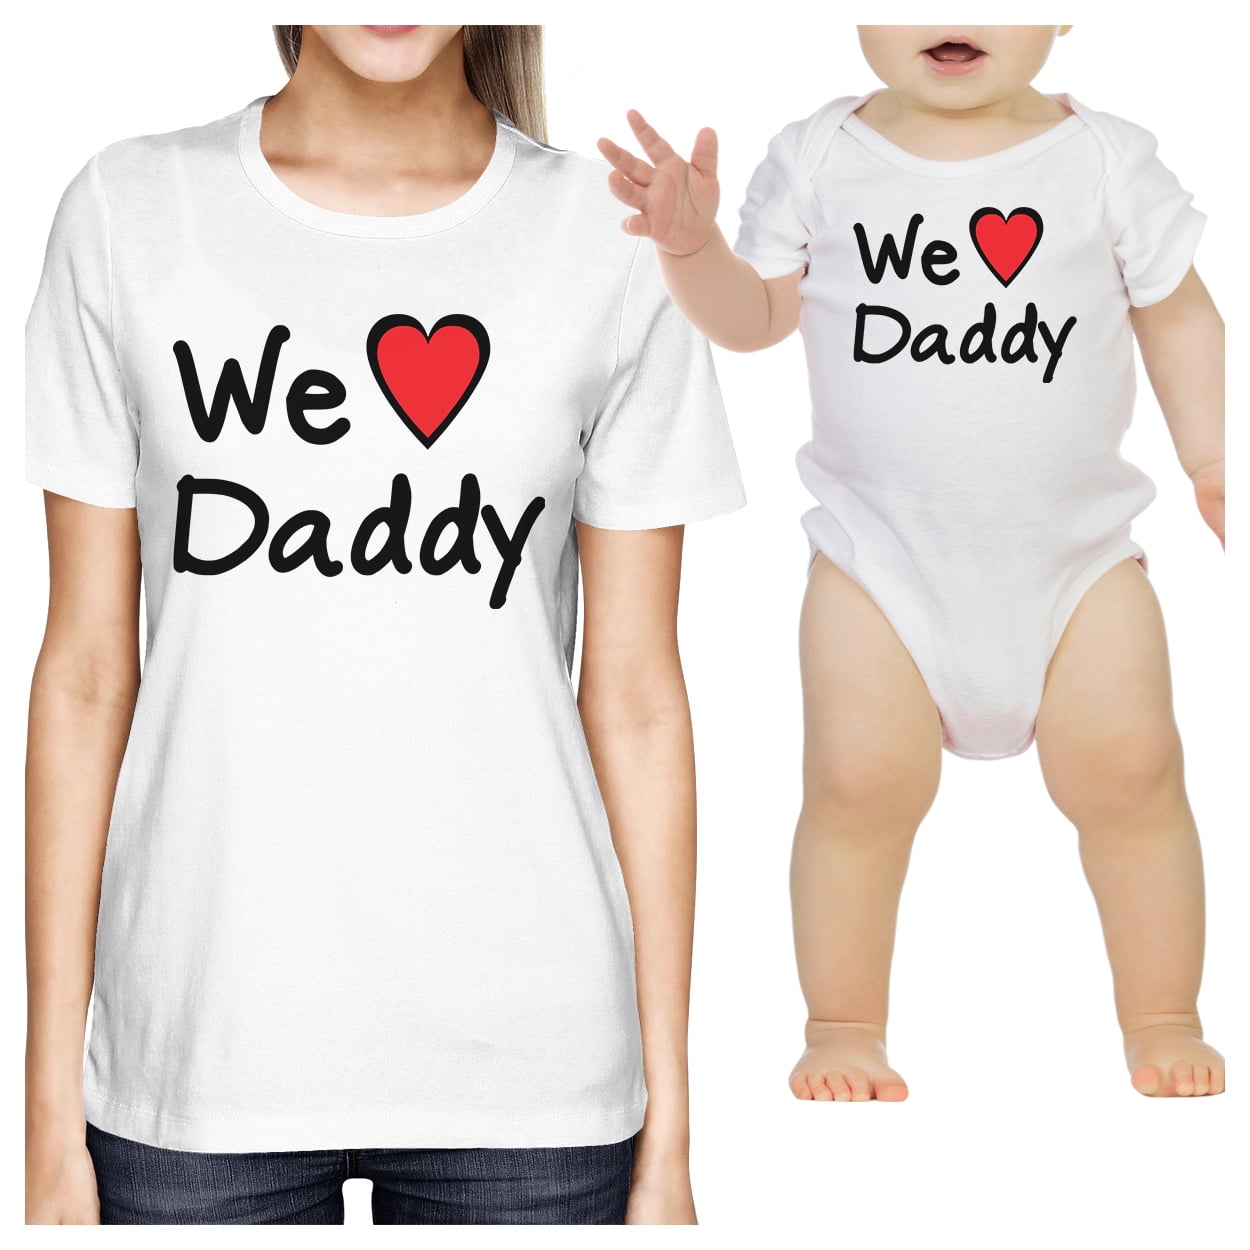 matching shirts for parents and baby